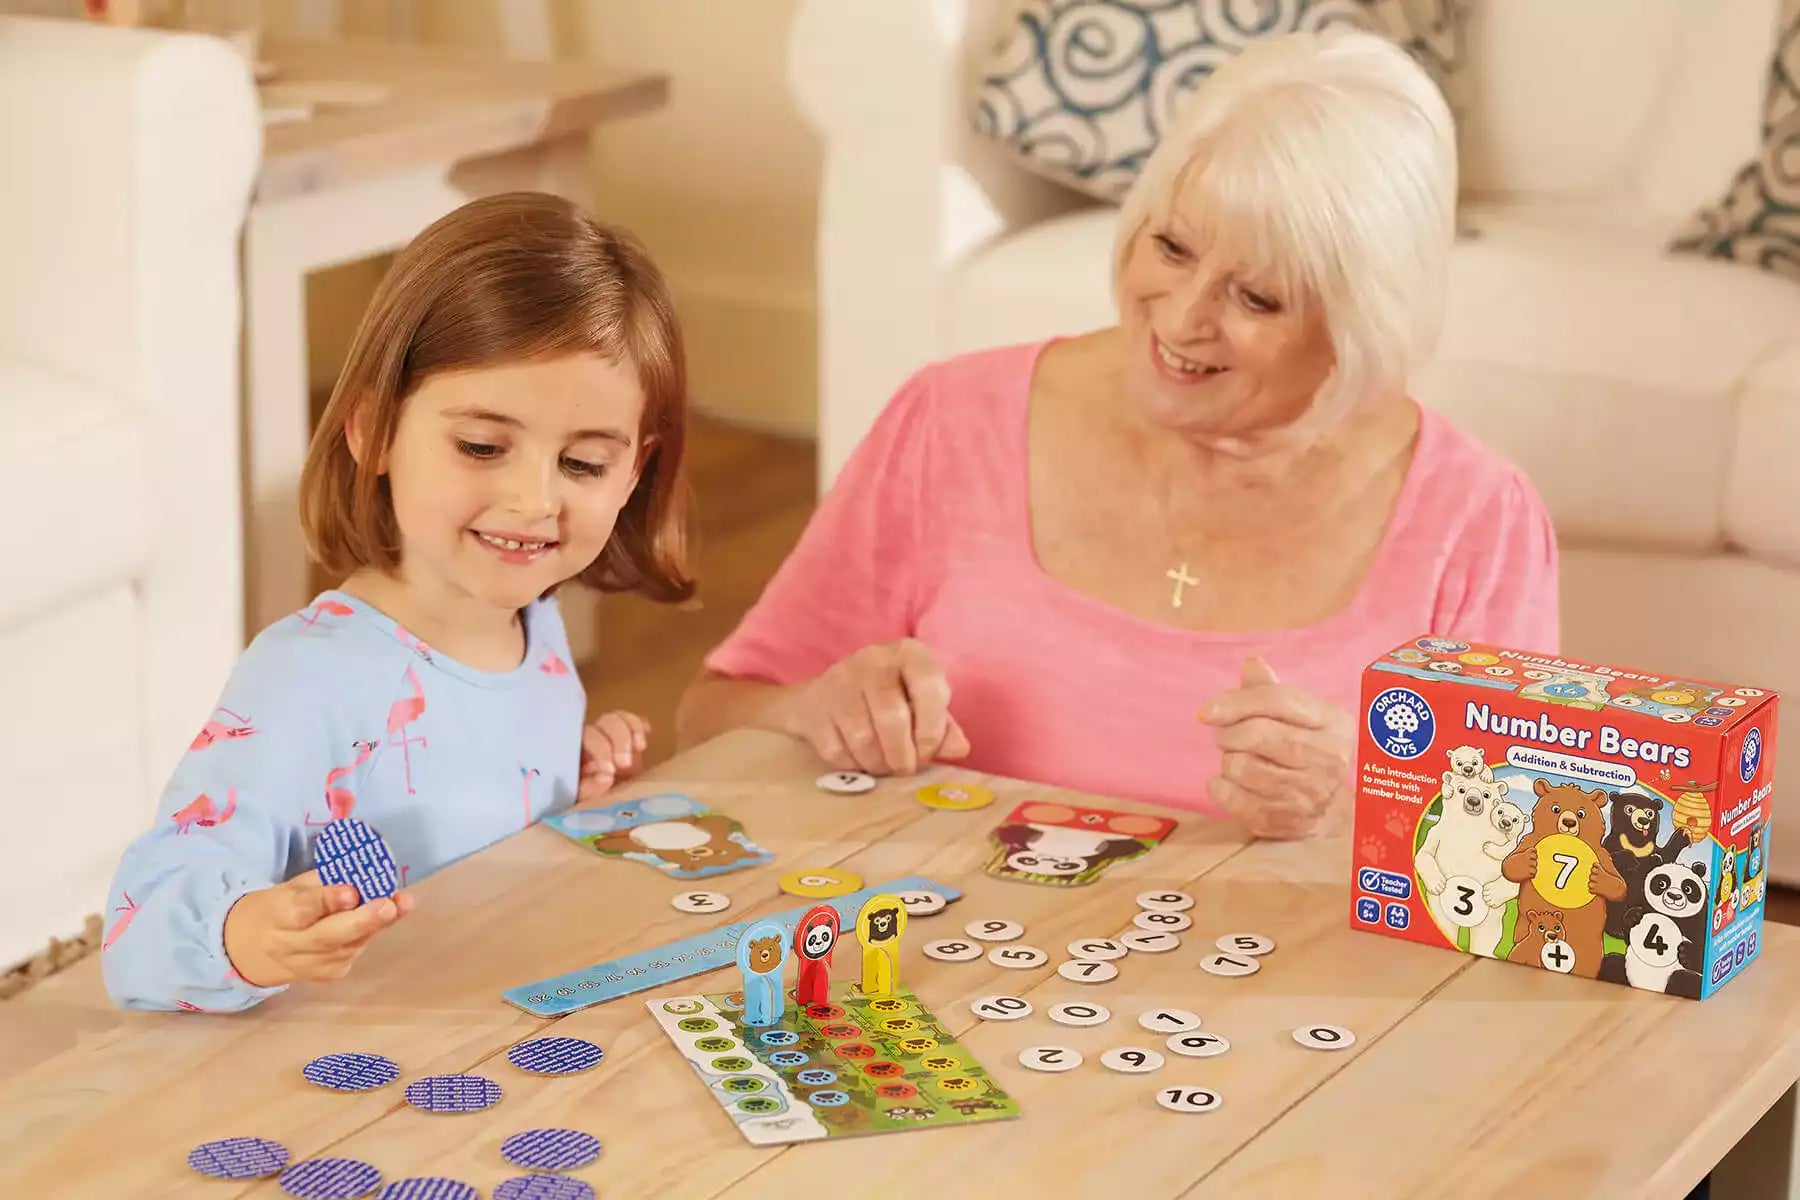 Parent and Kid playing with Number Bears